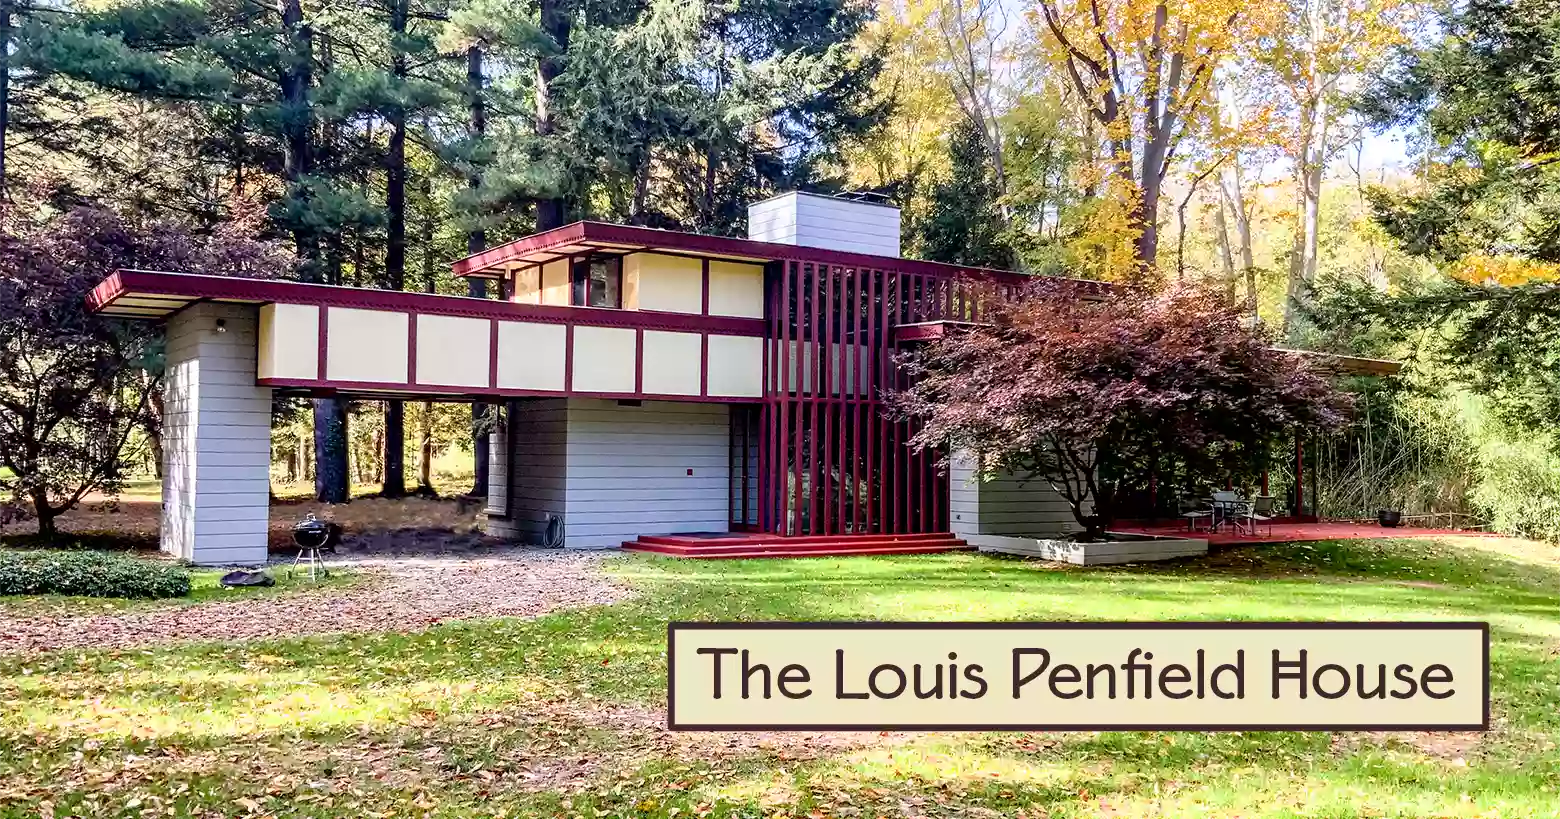 The Louis Penfield House